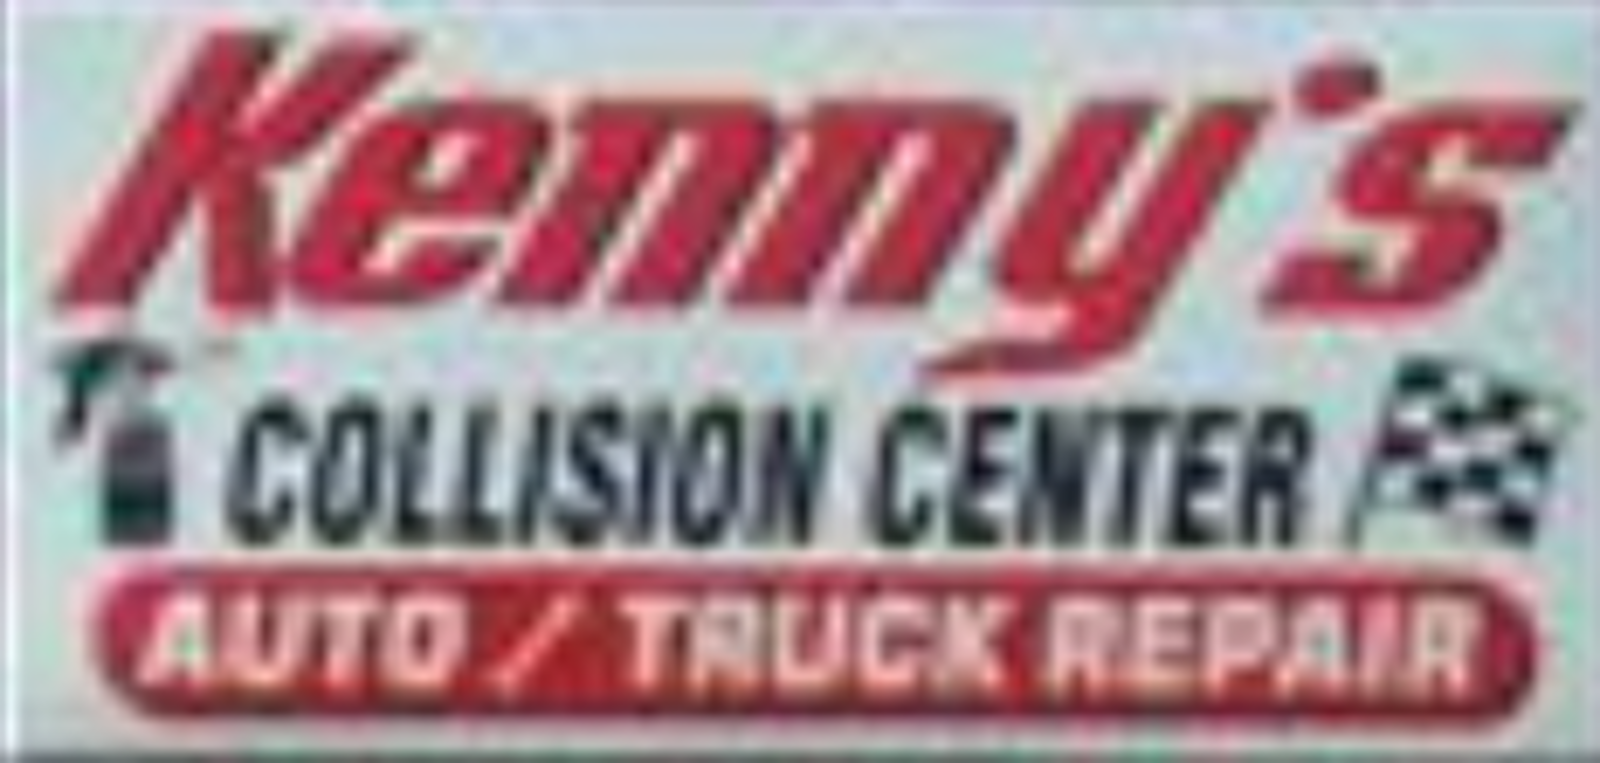 Kenny's Collision Center, Inc